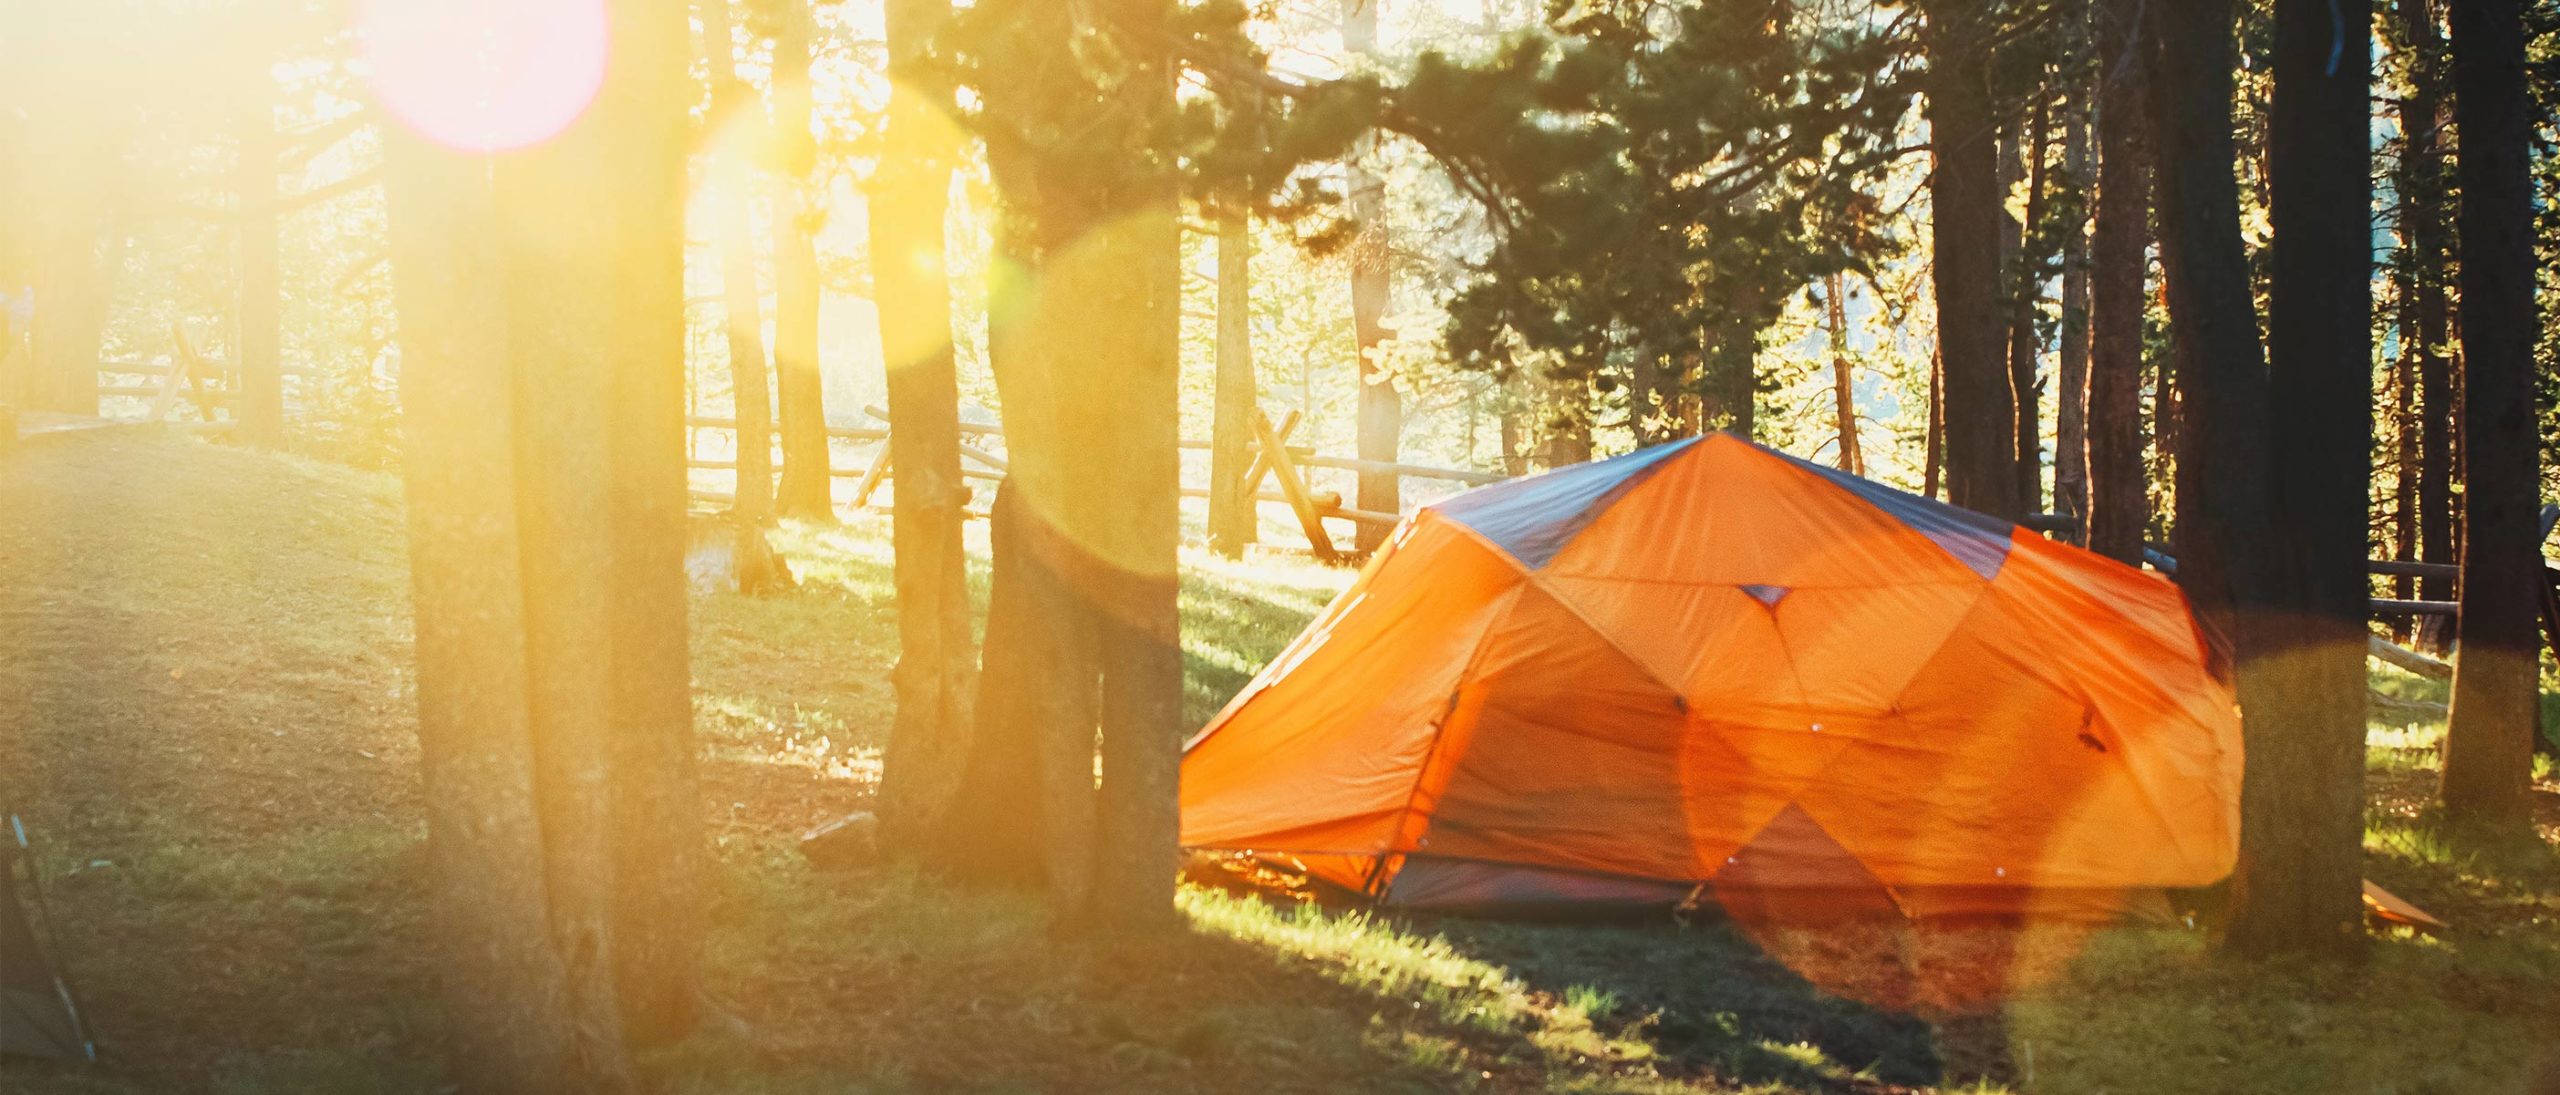 Our Camping Essentials Checklist for Your Next Getaway